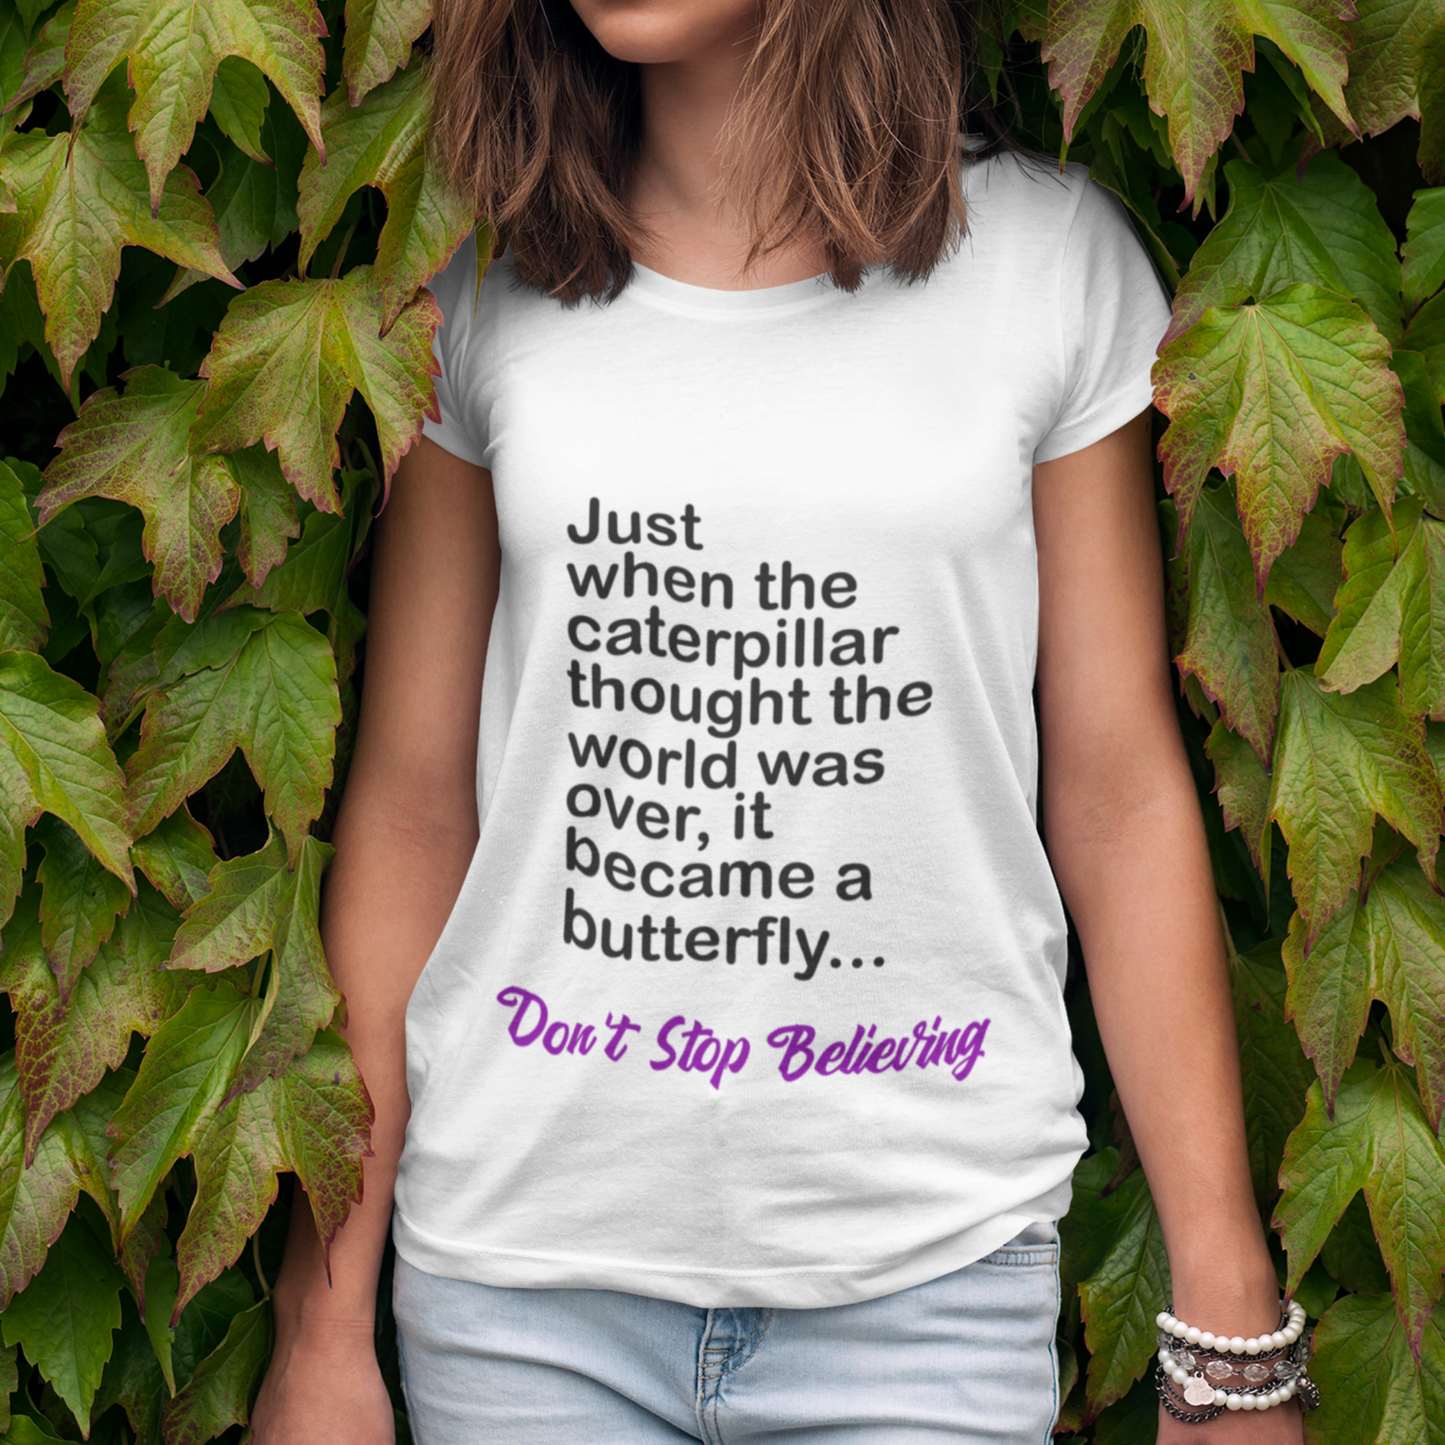 butterfly inspirational tee shirt the cosmos and beyond